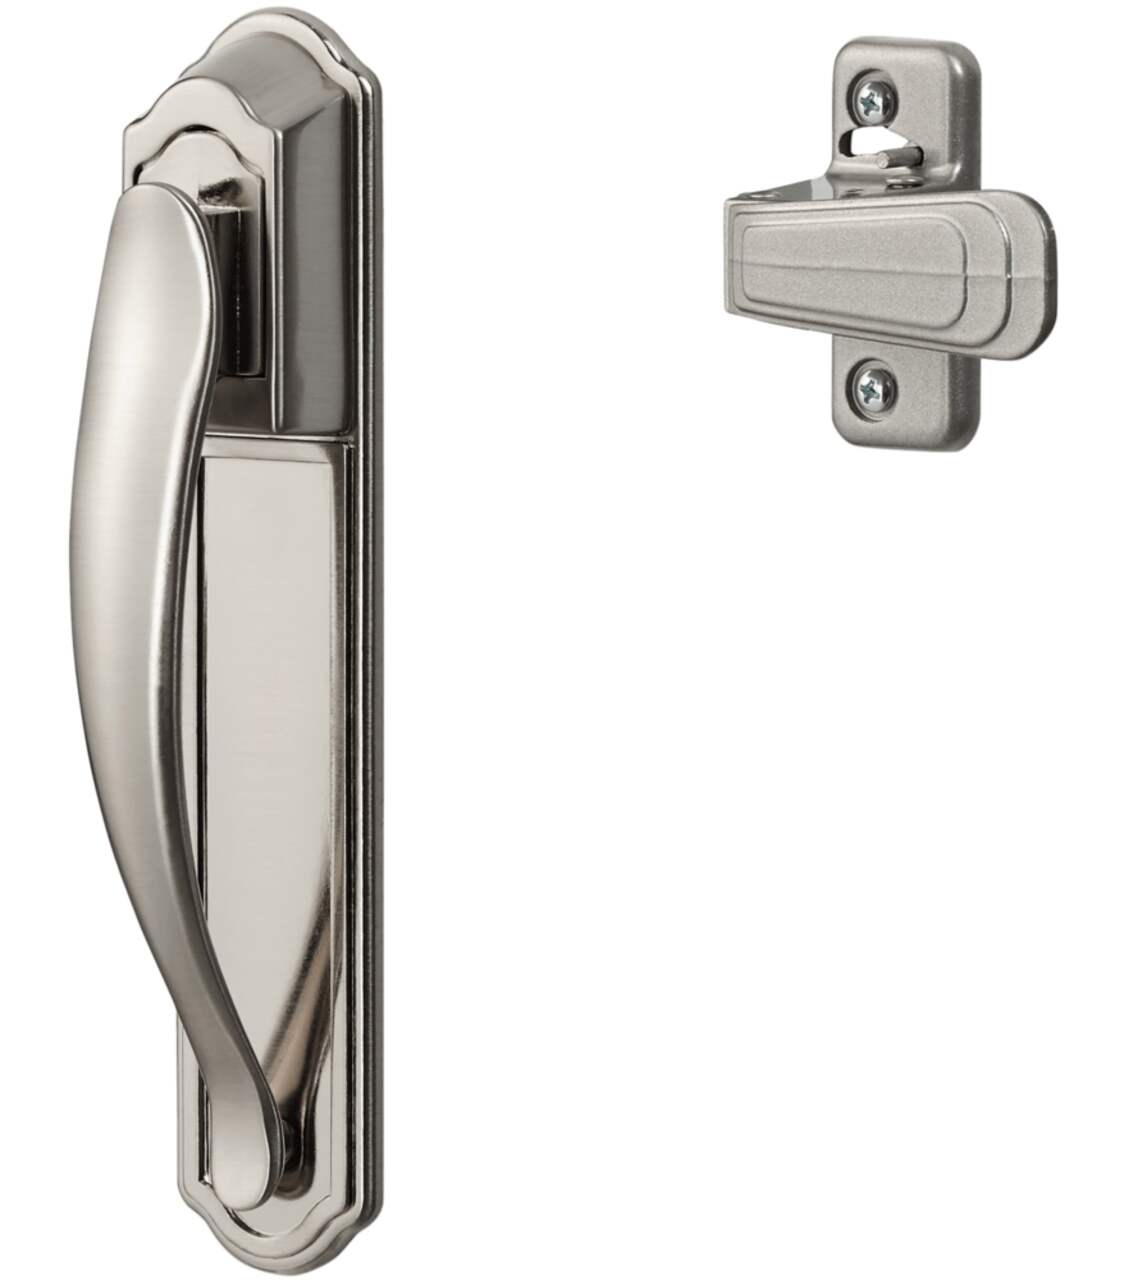 Ideal Security Deluxe Storm Door Pull Handle Set with Back Plate, Satin  Silver